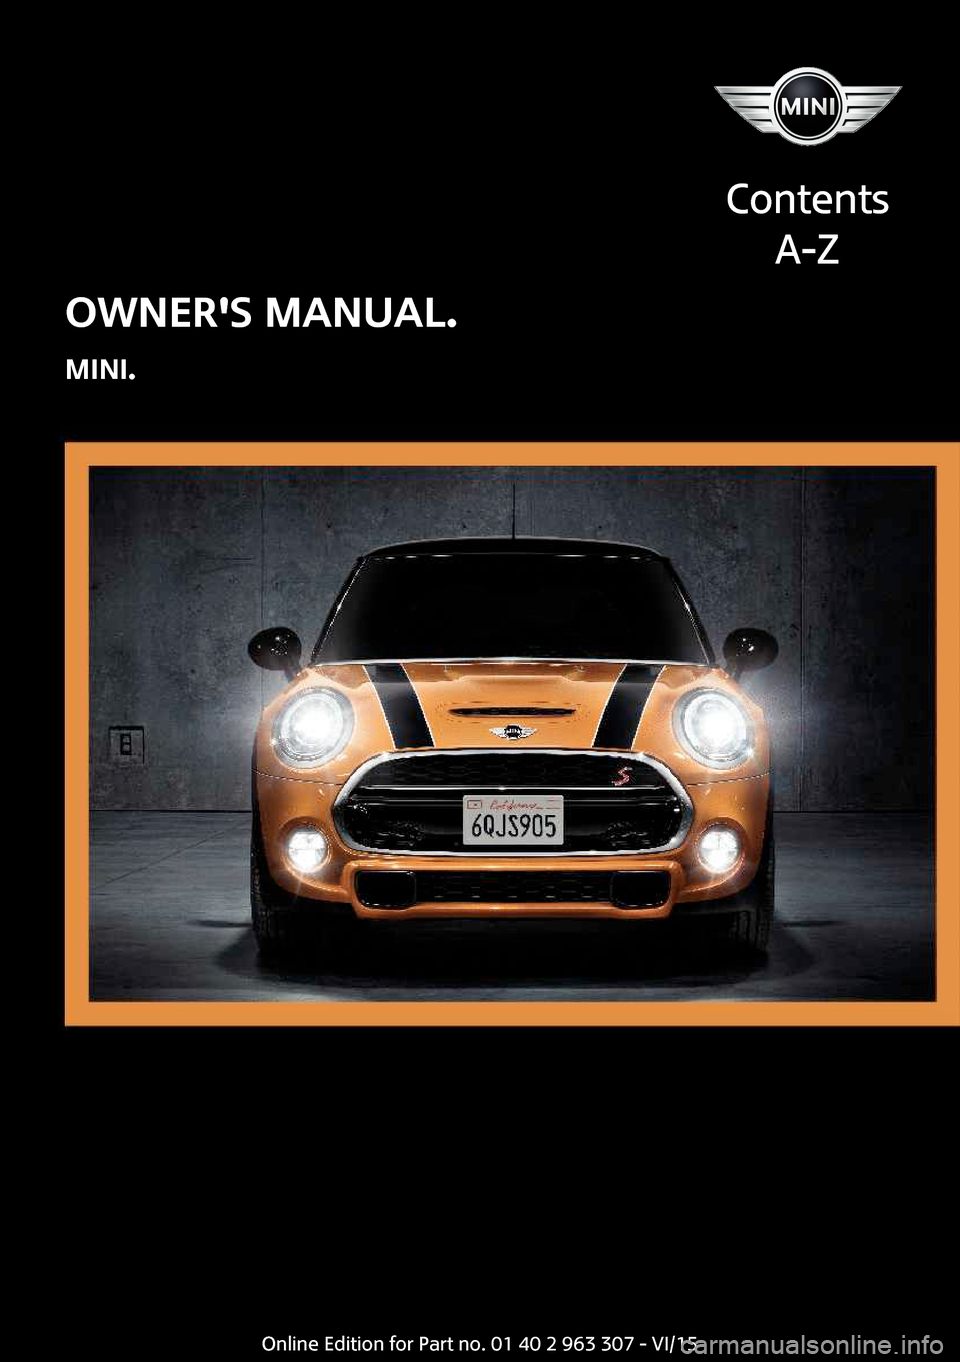 MINI Hardtop 4 Door 2016  Owners Manual OWNERS MANUAL.
Contents
A-Z
Online Edition for Part no. 01 40 2 963 307 - VI/15
MINI.  